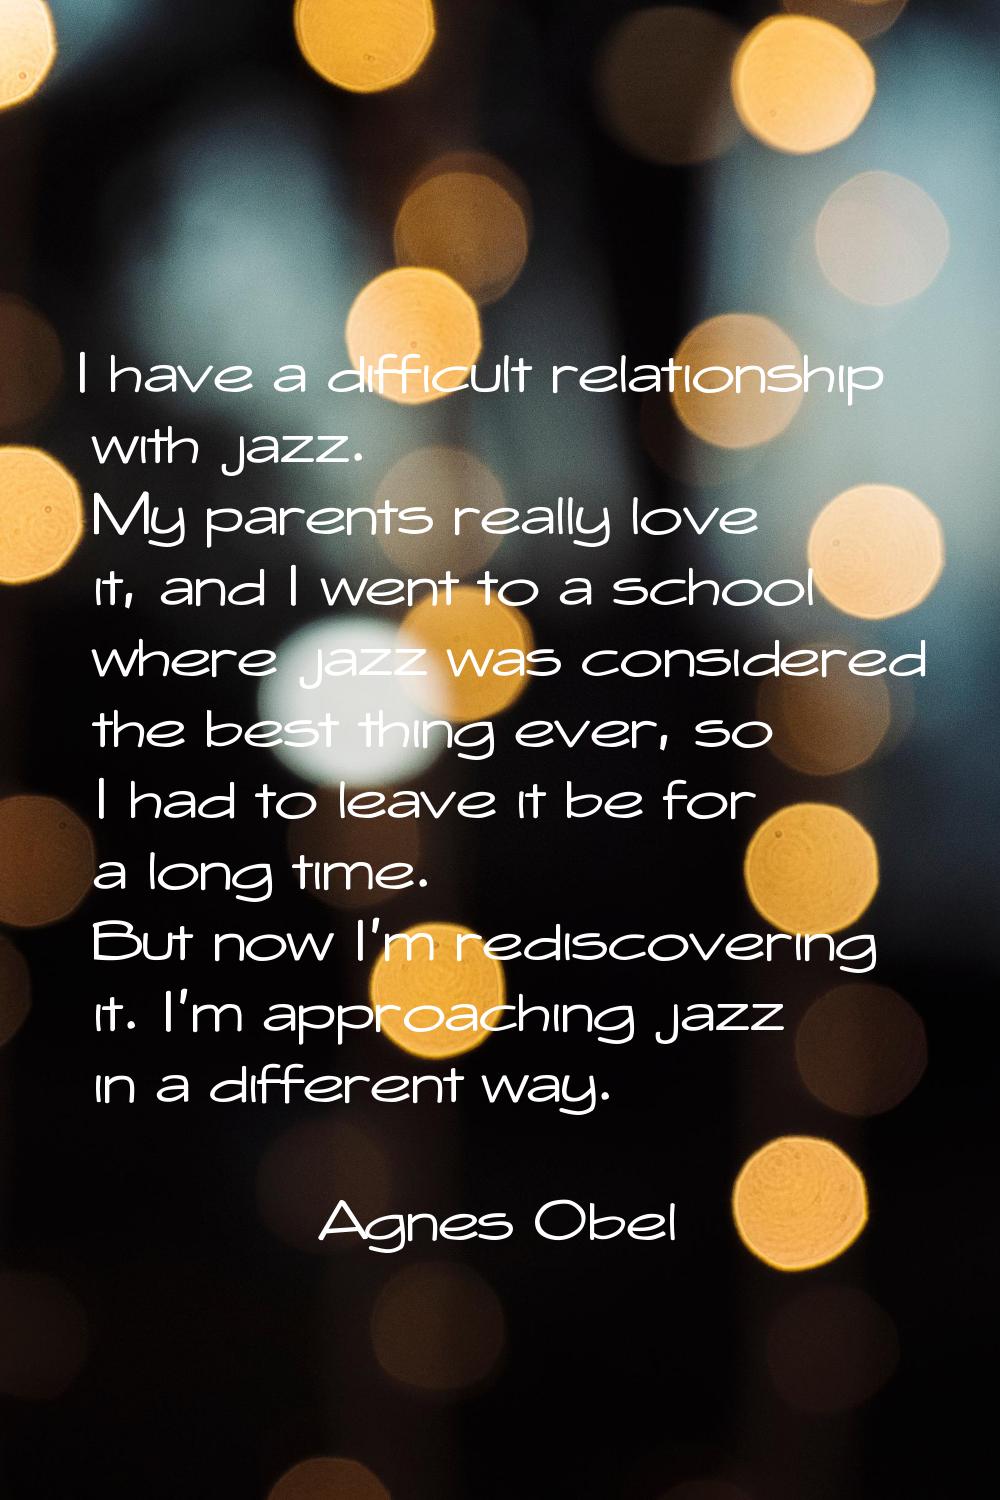 I have a difficult relationship with jazz. My parents really love it, and I went to a school where 